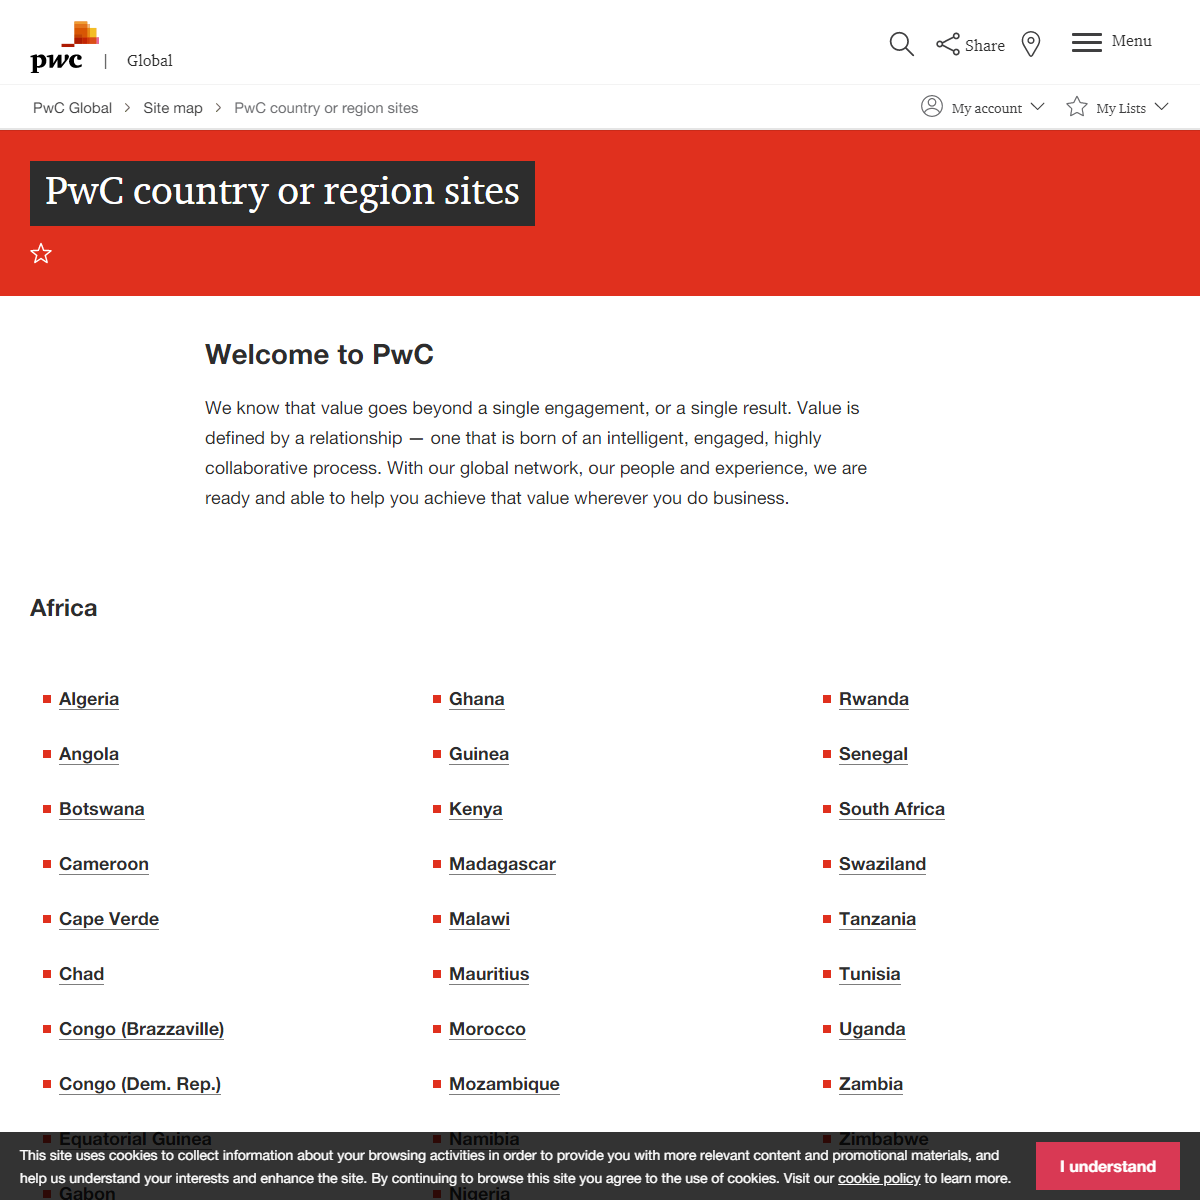 A complete backup of https://www.pwc.com/gx/en/site-map/site-index.html